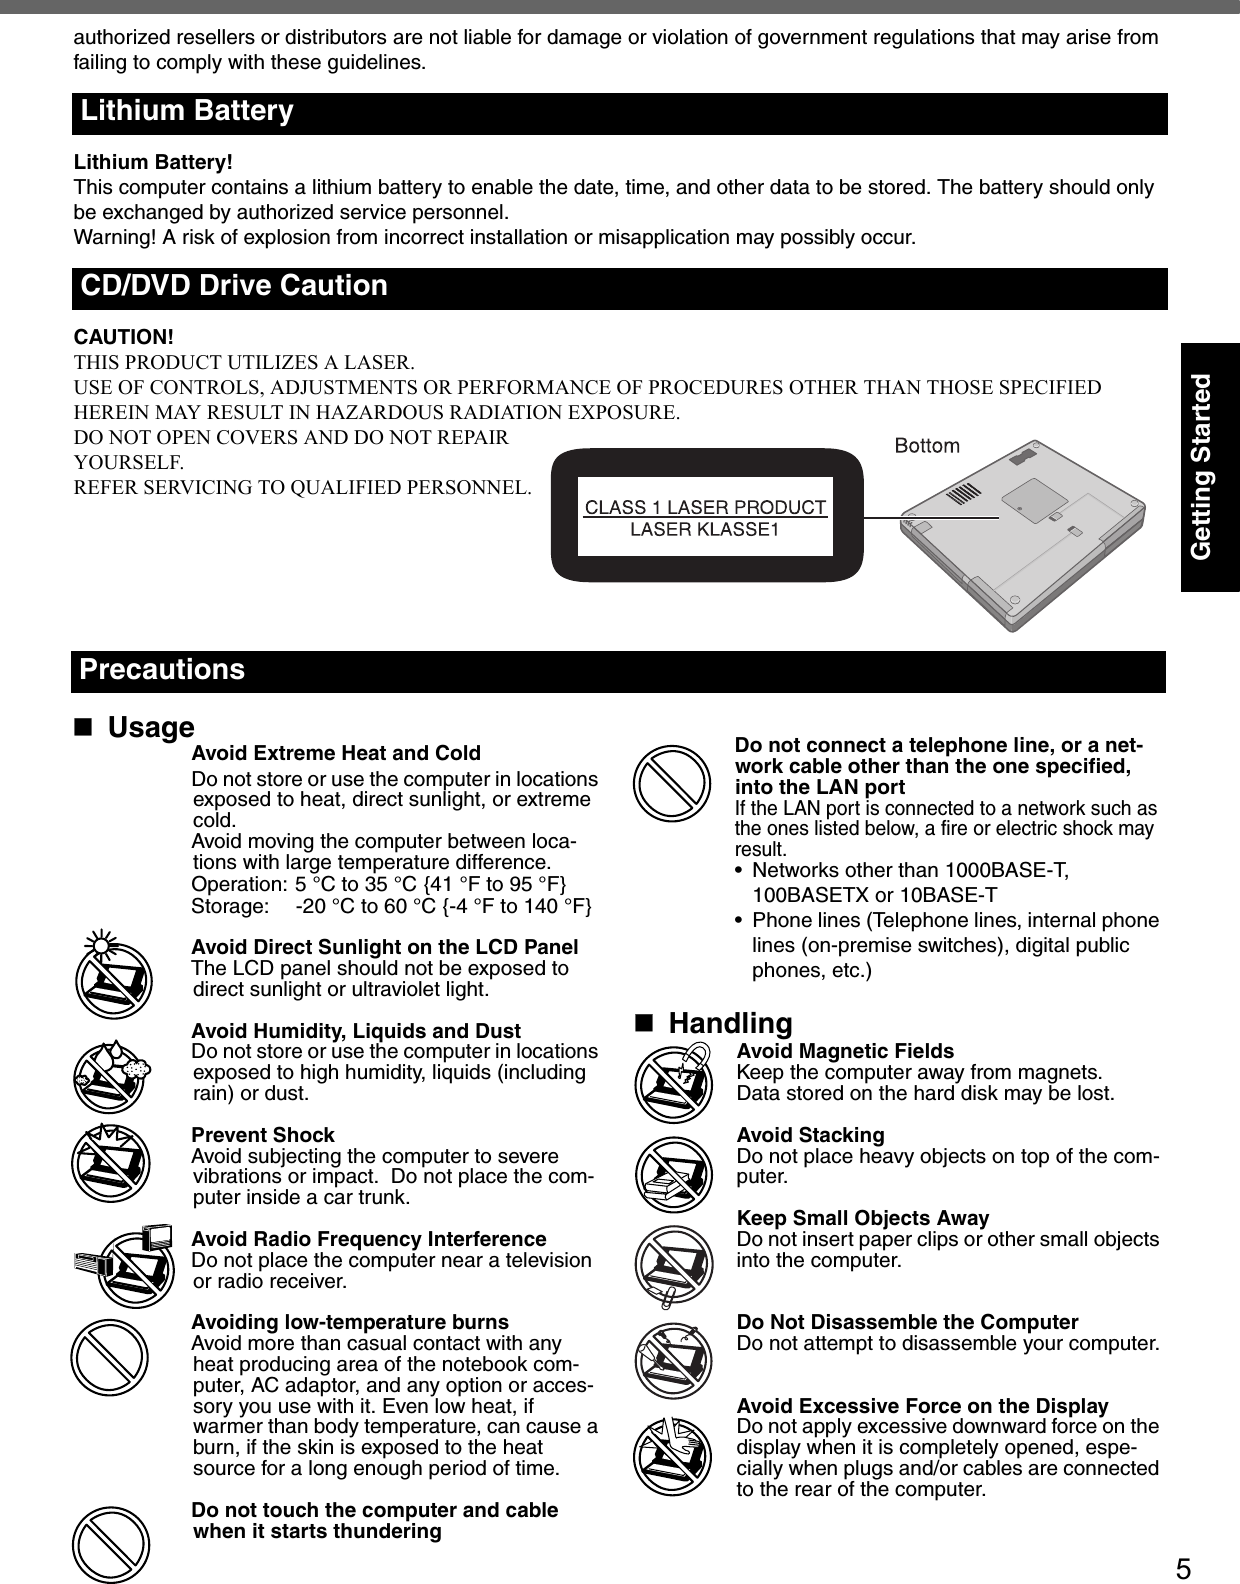 5Getting Startedauthorized resellers or distributors are not liable for damage or violation of government regulations that may arise from failing to comply with these guidelines.Lithium Battery!This computer contains a lithium battery to enable the date, time, and other data to be stored. The battery should only be exchanged by authorized service personnel.Warning! A risk of explosion from incorrect installation or misapplication may possibly occur.CAUTION!THIS PRODUCT UTILIZES A LASER.USE OF CONTROLS, ADJUSTMENTS OR PERFORMANCE OF PROCEDURES OTHER THAN THOSE SPECIFIED HEREIN MAY RESULT IN HAZARDOUS RADIATION EXPOSURE.DO NOT OPEN COVERS AND DO NOT REPAIRYOURSELF.REFER SERVICING TO QUALIFIED PERSONNEL.Lithium BatteryCD/DVD Drive CautionUsageAvoid Extreme Heat and ColdDo not store or use the computer in locations exposed to heat, direct sunlight, or extreme cold.Avoid moving the computer between loca-tions with large temperature difference.Operation: 5 °C to 35 °C {41 °F to 95 °F}Storage: -20 °C to 60 °C {-4 °F to 140 °F}Avoid Direct Sunlight on the LCD PanelThe LCD panel should not be exposed to direct sunlight or ultraviolet light.Avoid Humidity, Liquids and DustDo not store or use the computer in locations exposed to high humidity, liquids (including rain) or dust.Prevent ShockAvoid subjecting the computer to severe vibrations or impact.  Do not place the com-puter inside a car trunk.Avoid Radio Frequency InterferenceDo not place the computer near a television or radio receiver.Avoiding low-temperature burnsAvoid more than casual contact with any heat producing area of the notebook com-puter, AC adaptor, and any option or acces-sory you use with it. Even low heat, if warmer than body temperature, can cause a burn, if the skin is exposed to the heat source for a long enough period of time.Do not touch the computer and cable when it starts thunderingDo not connect a telephone line, or a net-work cable other than the one specified, into the LAN portIf the LAN port is connected to a network such asthe ones listed below, a fire or electric shock mayresult.• Networks other than 1000BASE-T, 100BASETX or 10BASE-T• Phone lines (Telephone lines, internal phone lines (on-premise switches), digital public phones, etc.)HandlingAvoid Magnetic FieldsKeep the computer away from magnets.Data stored on the hard disk may be lost.Avoid StackingDo not place heavy objects on top of the com-puter.Keep Small Objects AwayDo not insert paper clips or other small objects into the computer.Do Not Disassemble the ComputerDo not attempt to disassemble your computer.Avoid Excessive Force on the DisplayDo not apply excessive downward force on the display when it is completely opened, espe-cially when plugs and/or cables are connected to the rear of the computer.Precautions